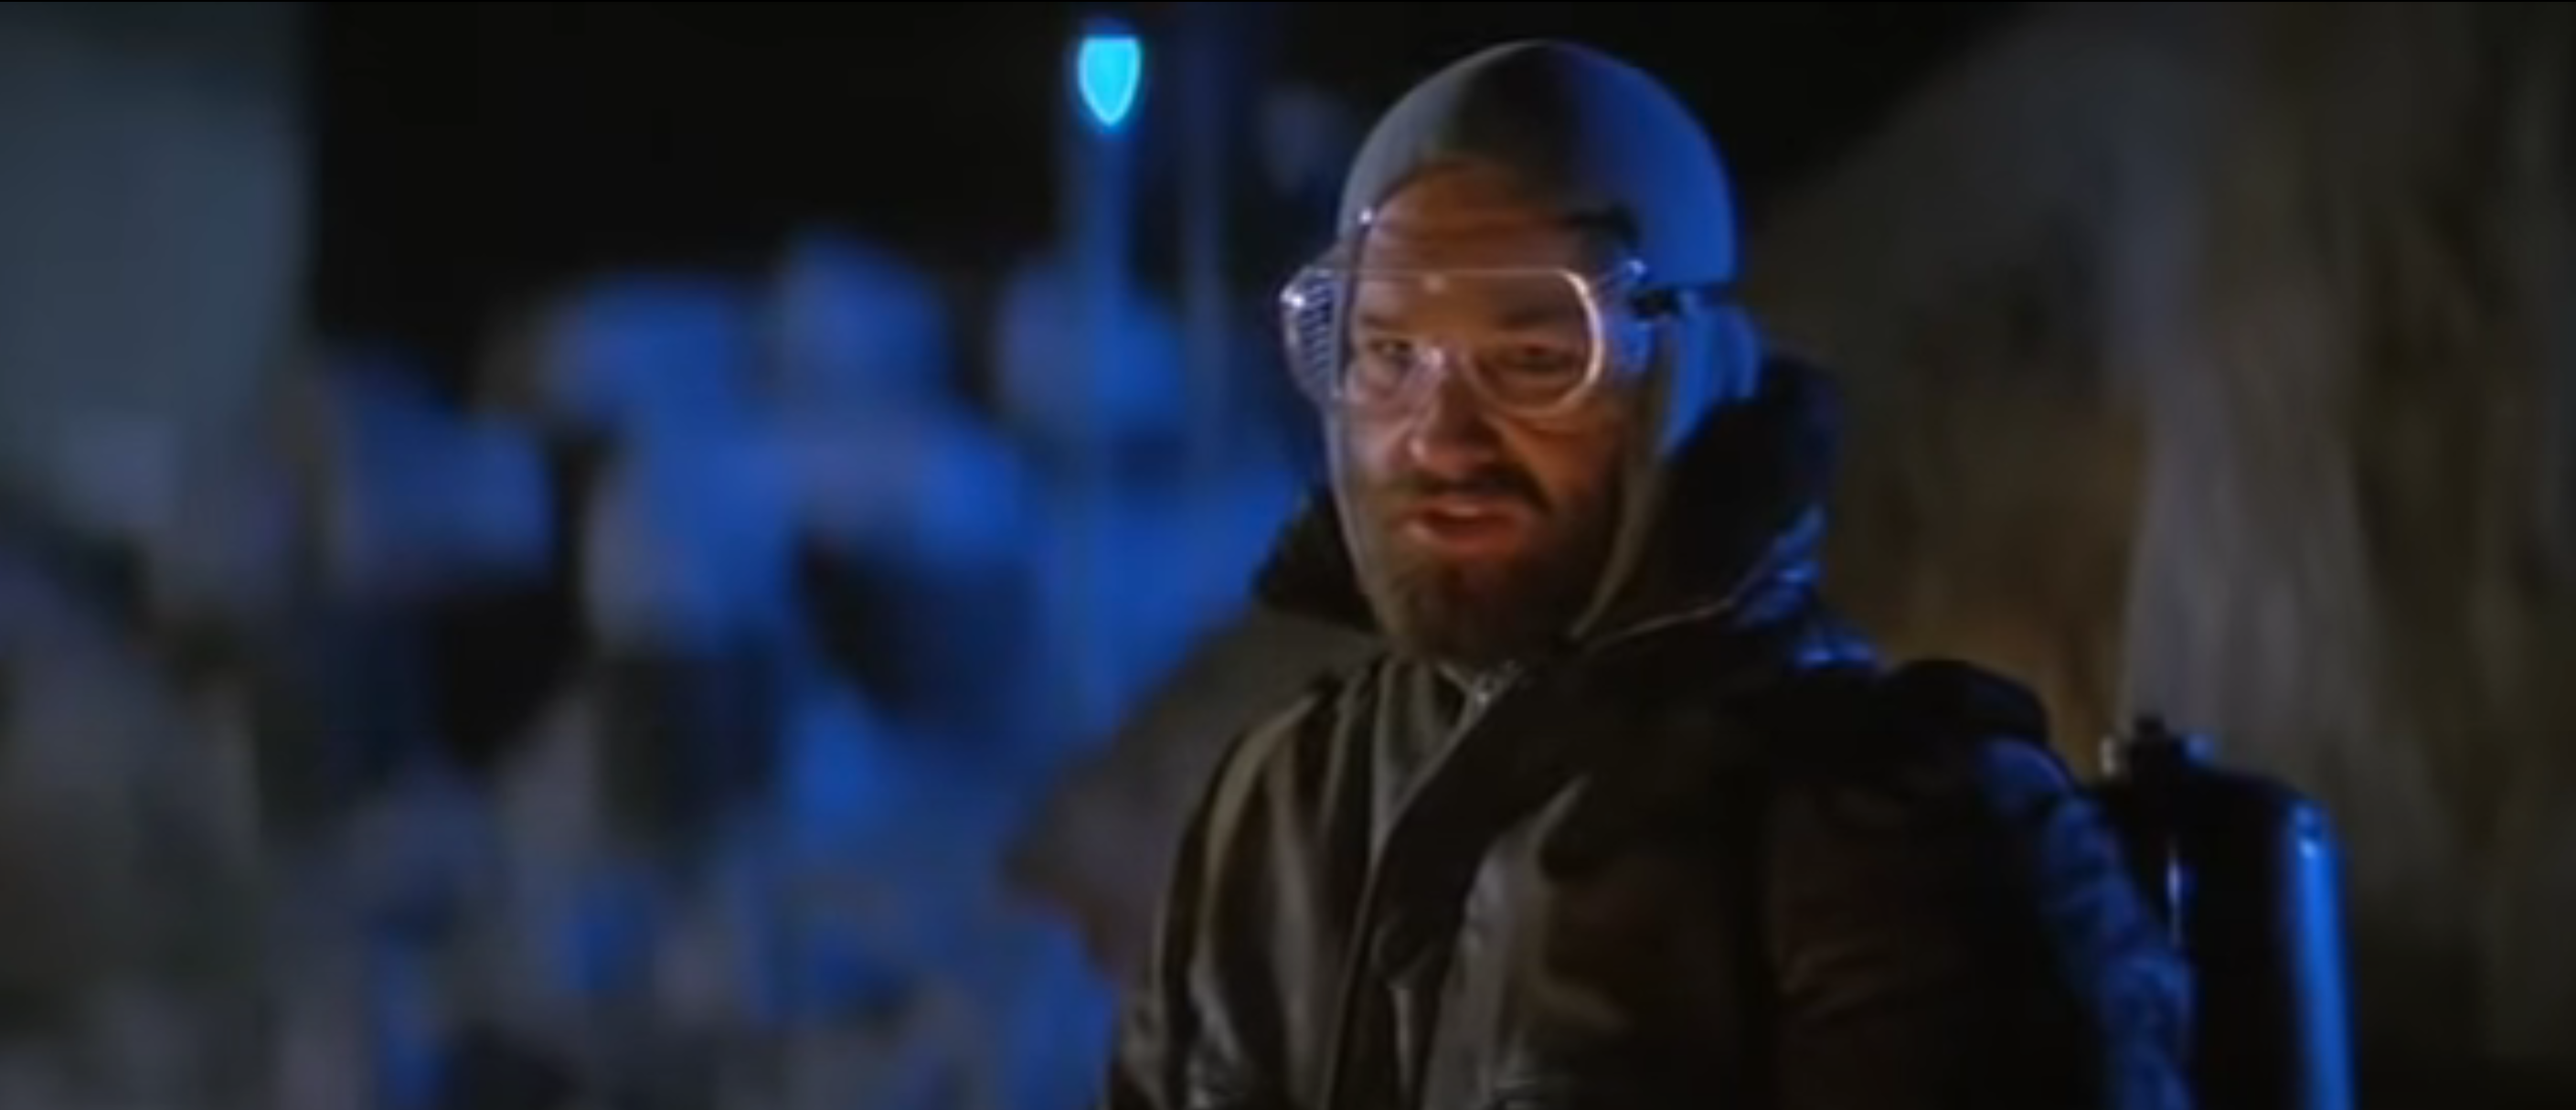 Kurt Russell in a safety suit and goggles